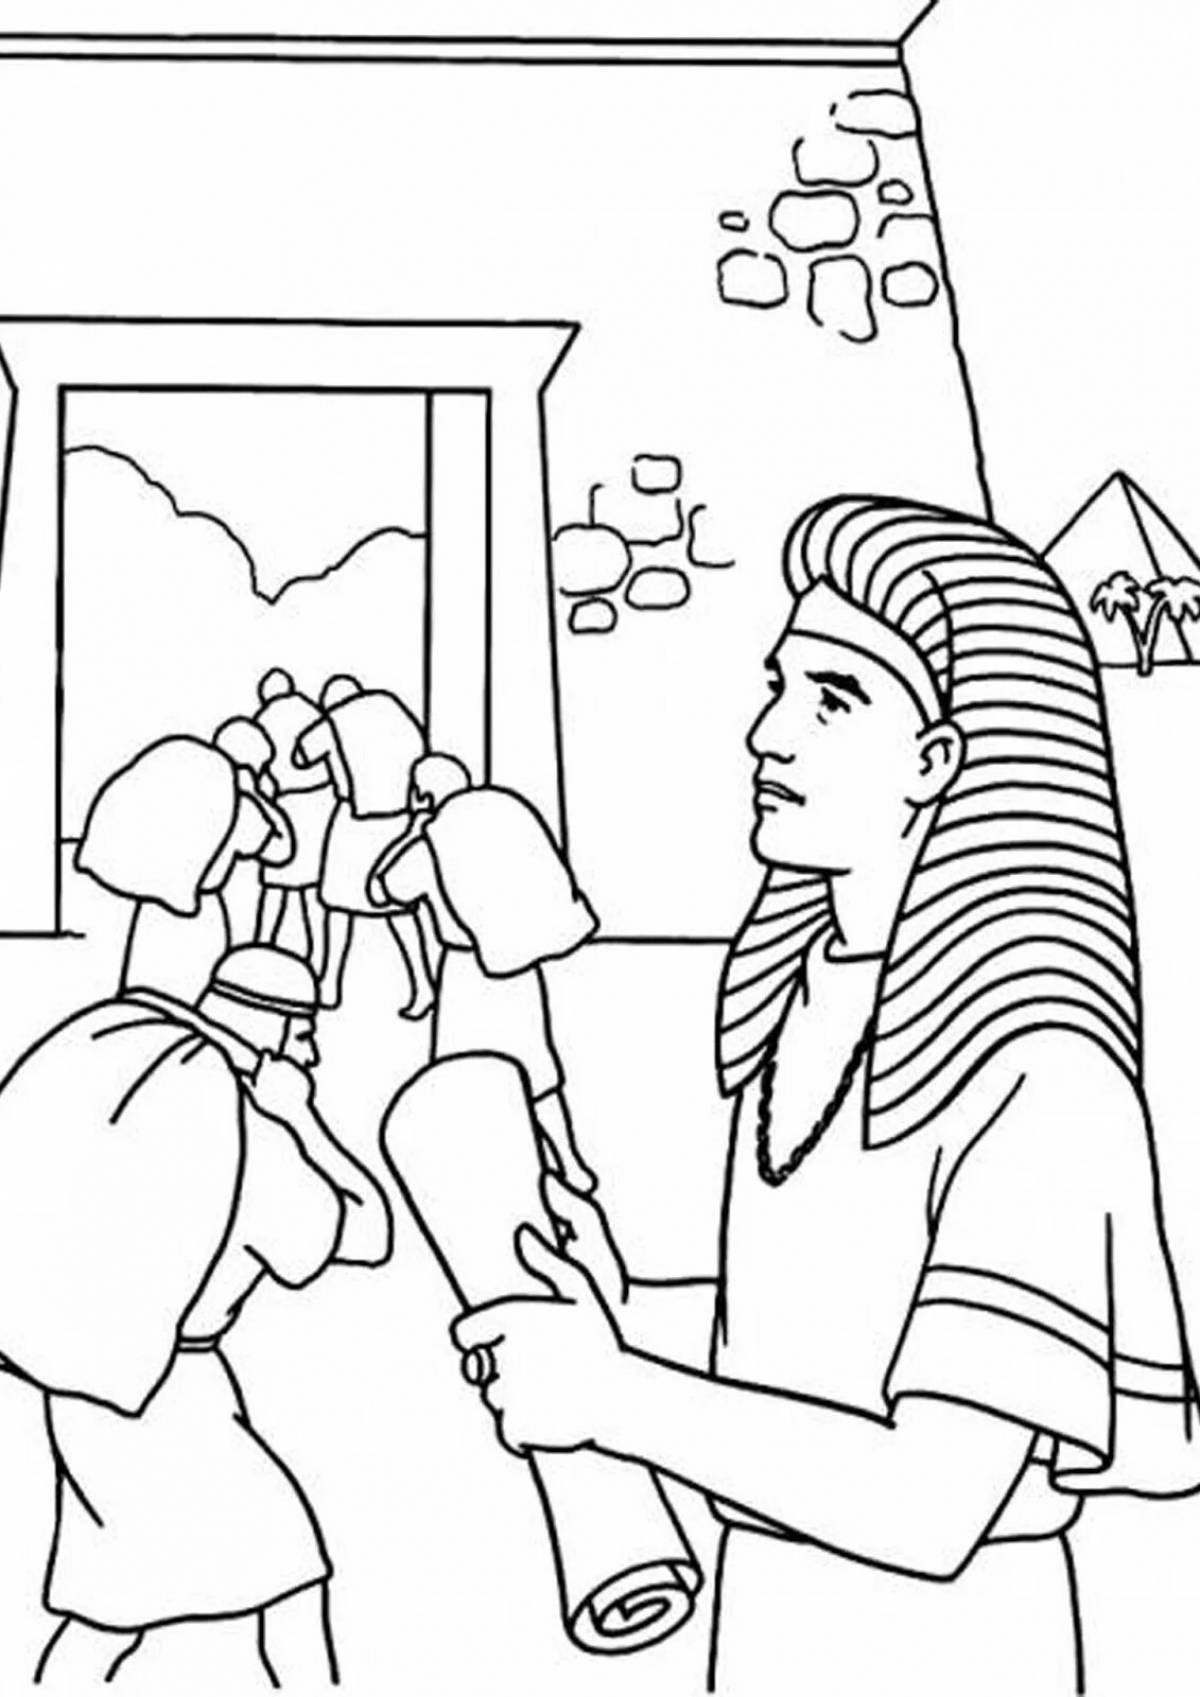 Colorful image of joseph in egypt coloring book